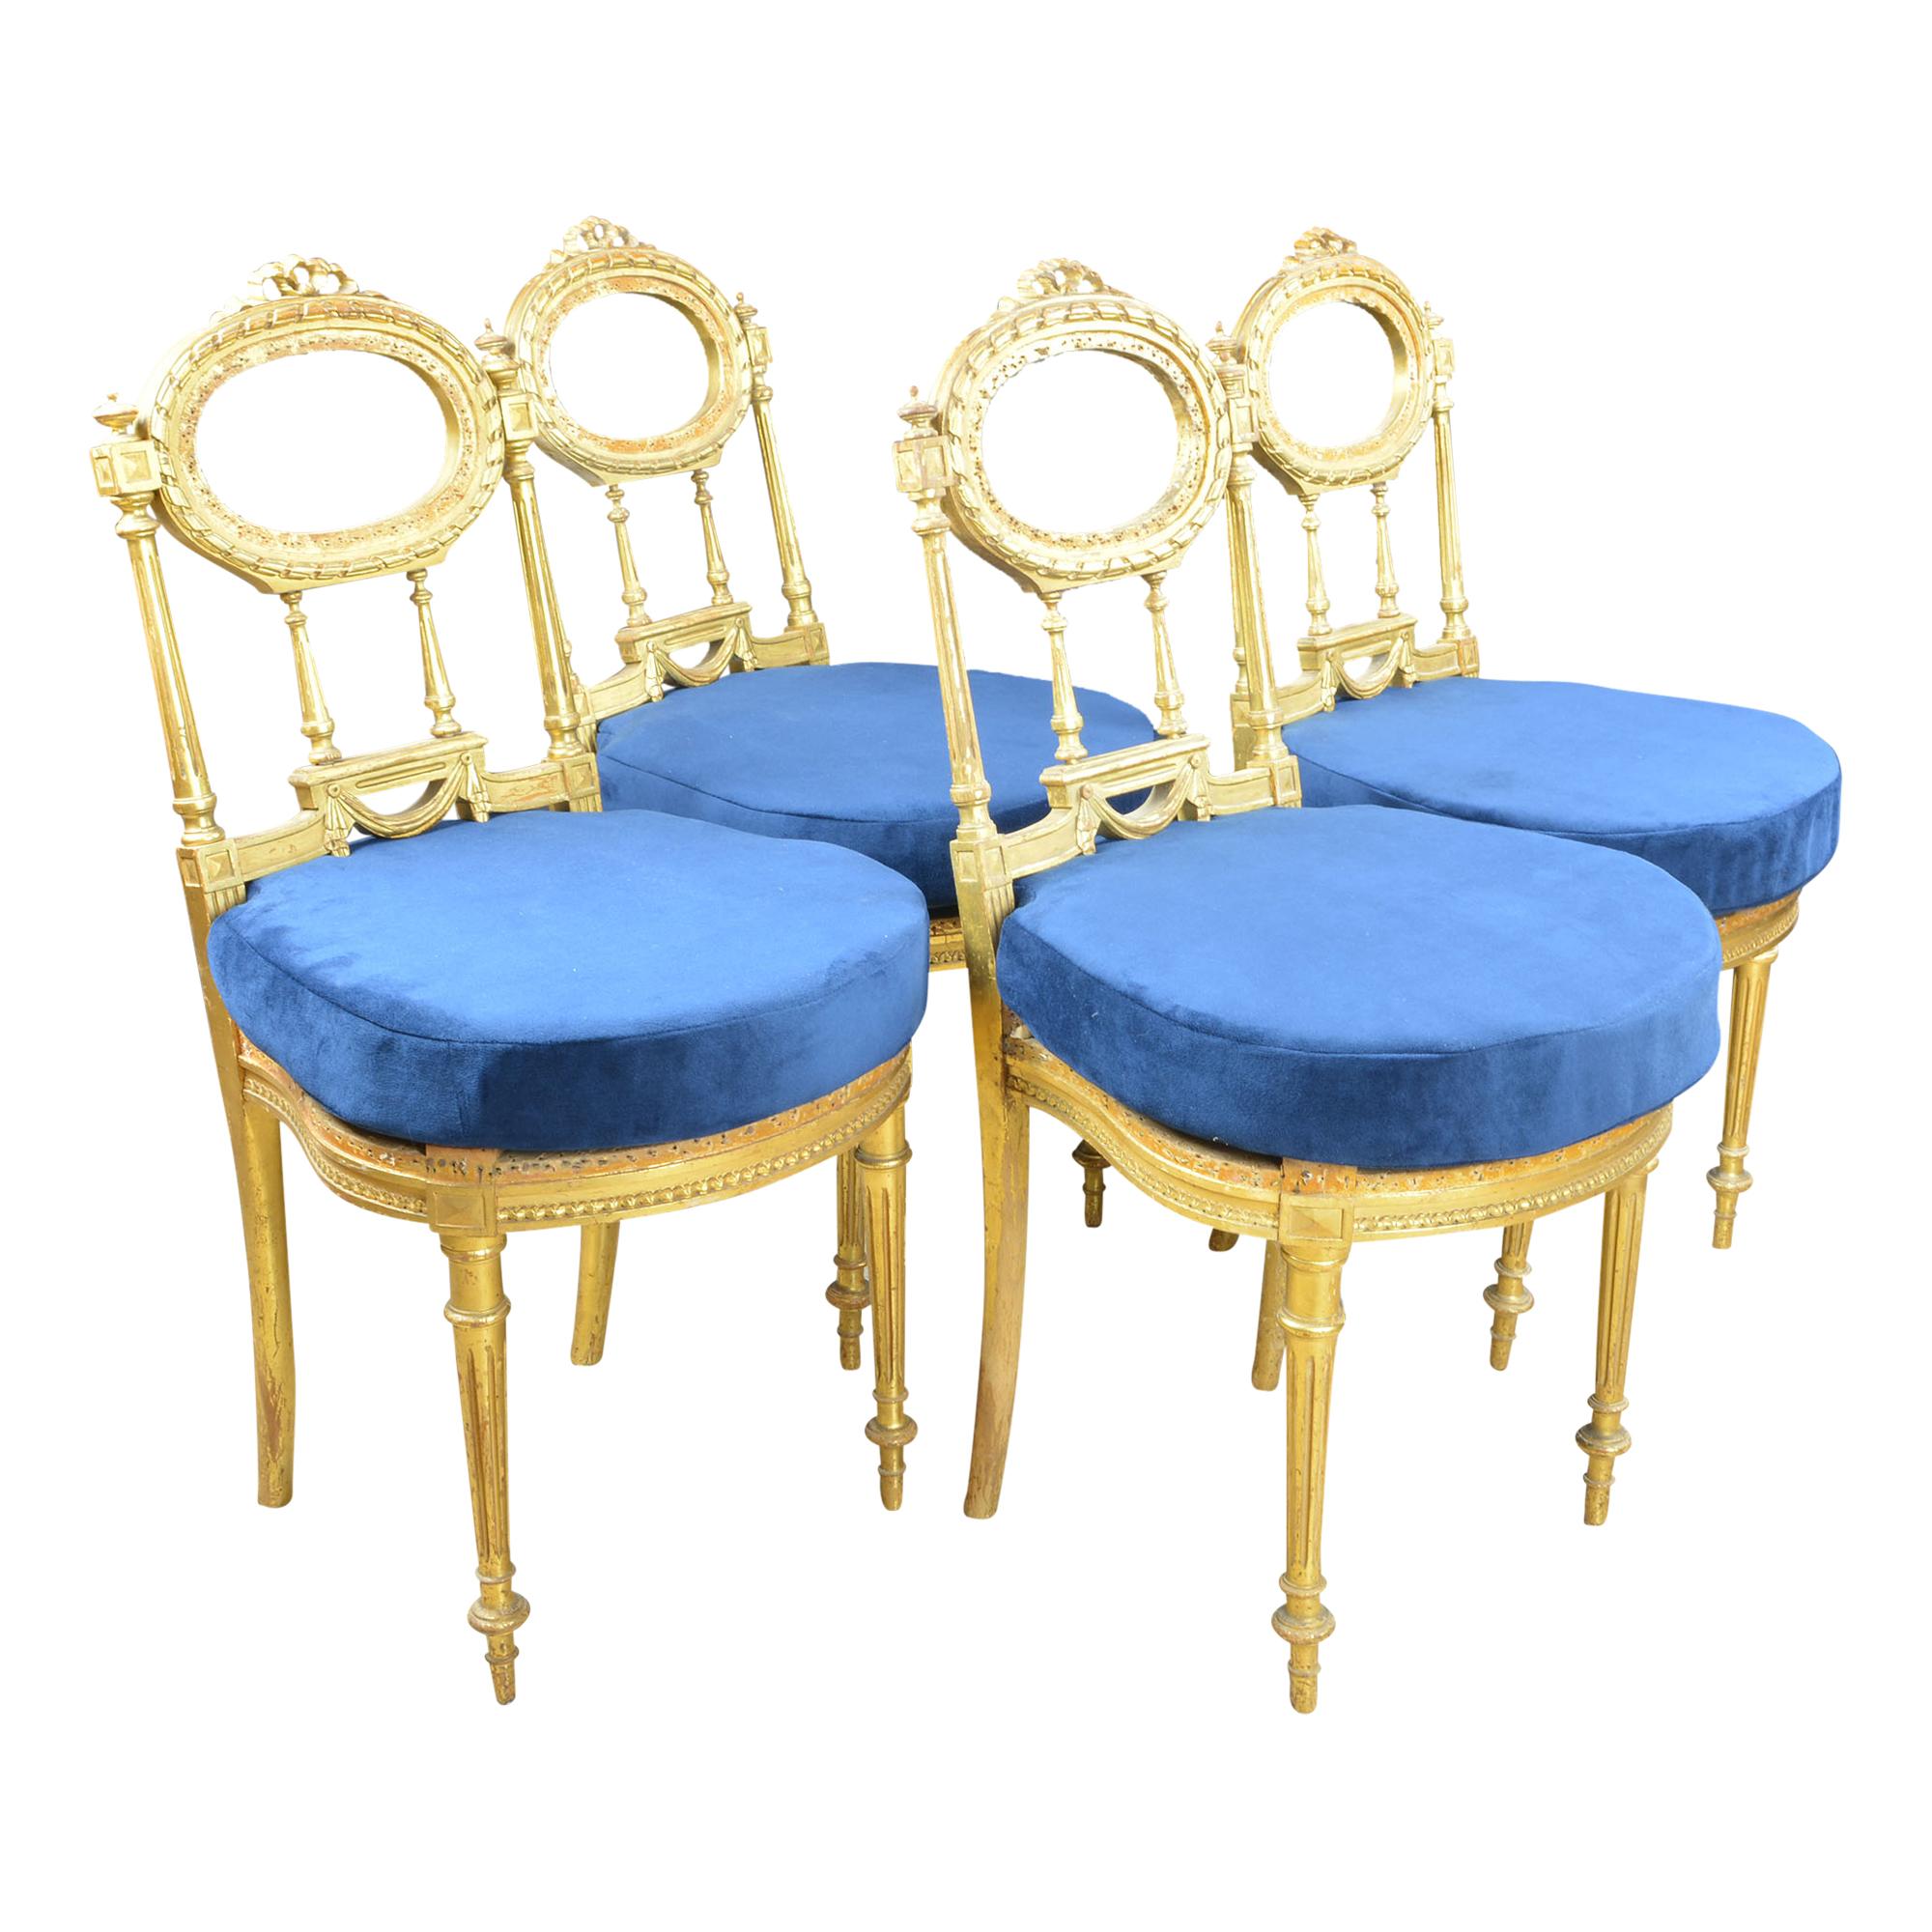 Antique Giltwood Chairs with Blue Velvet Cushions Set of 4 For Sale 2